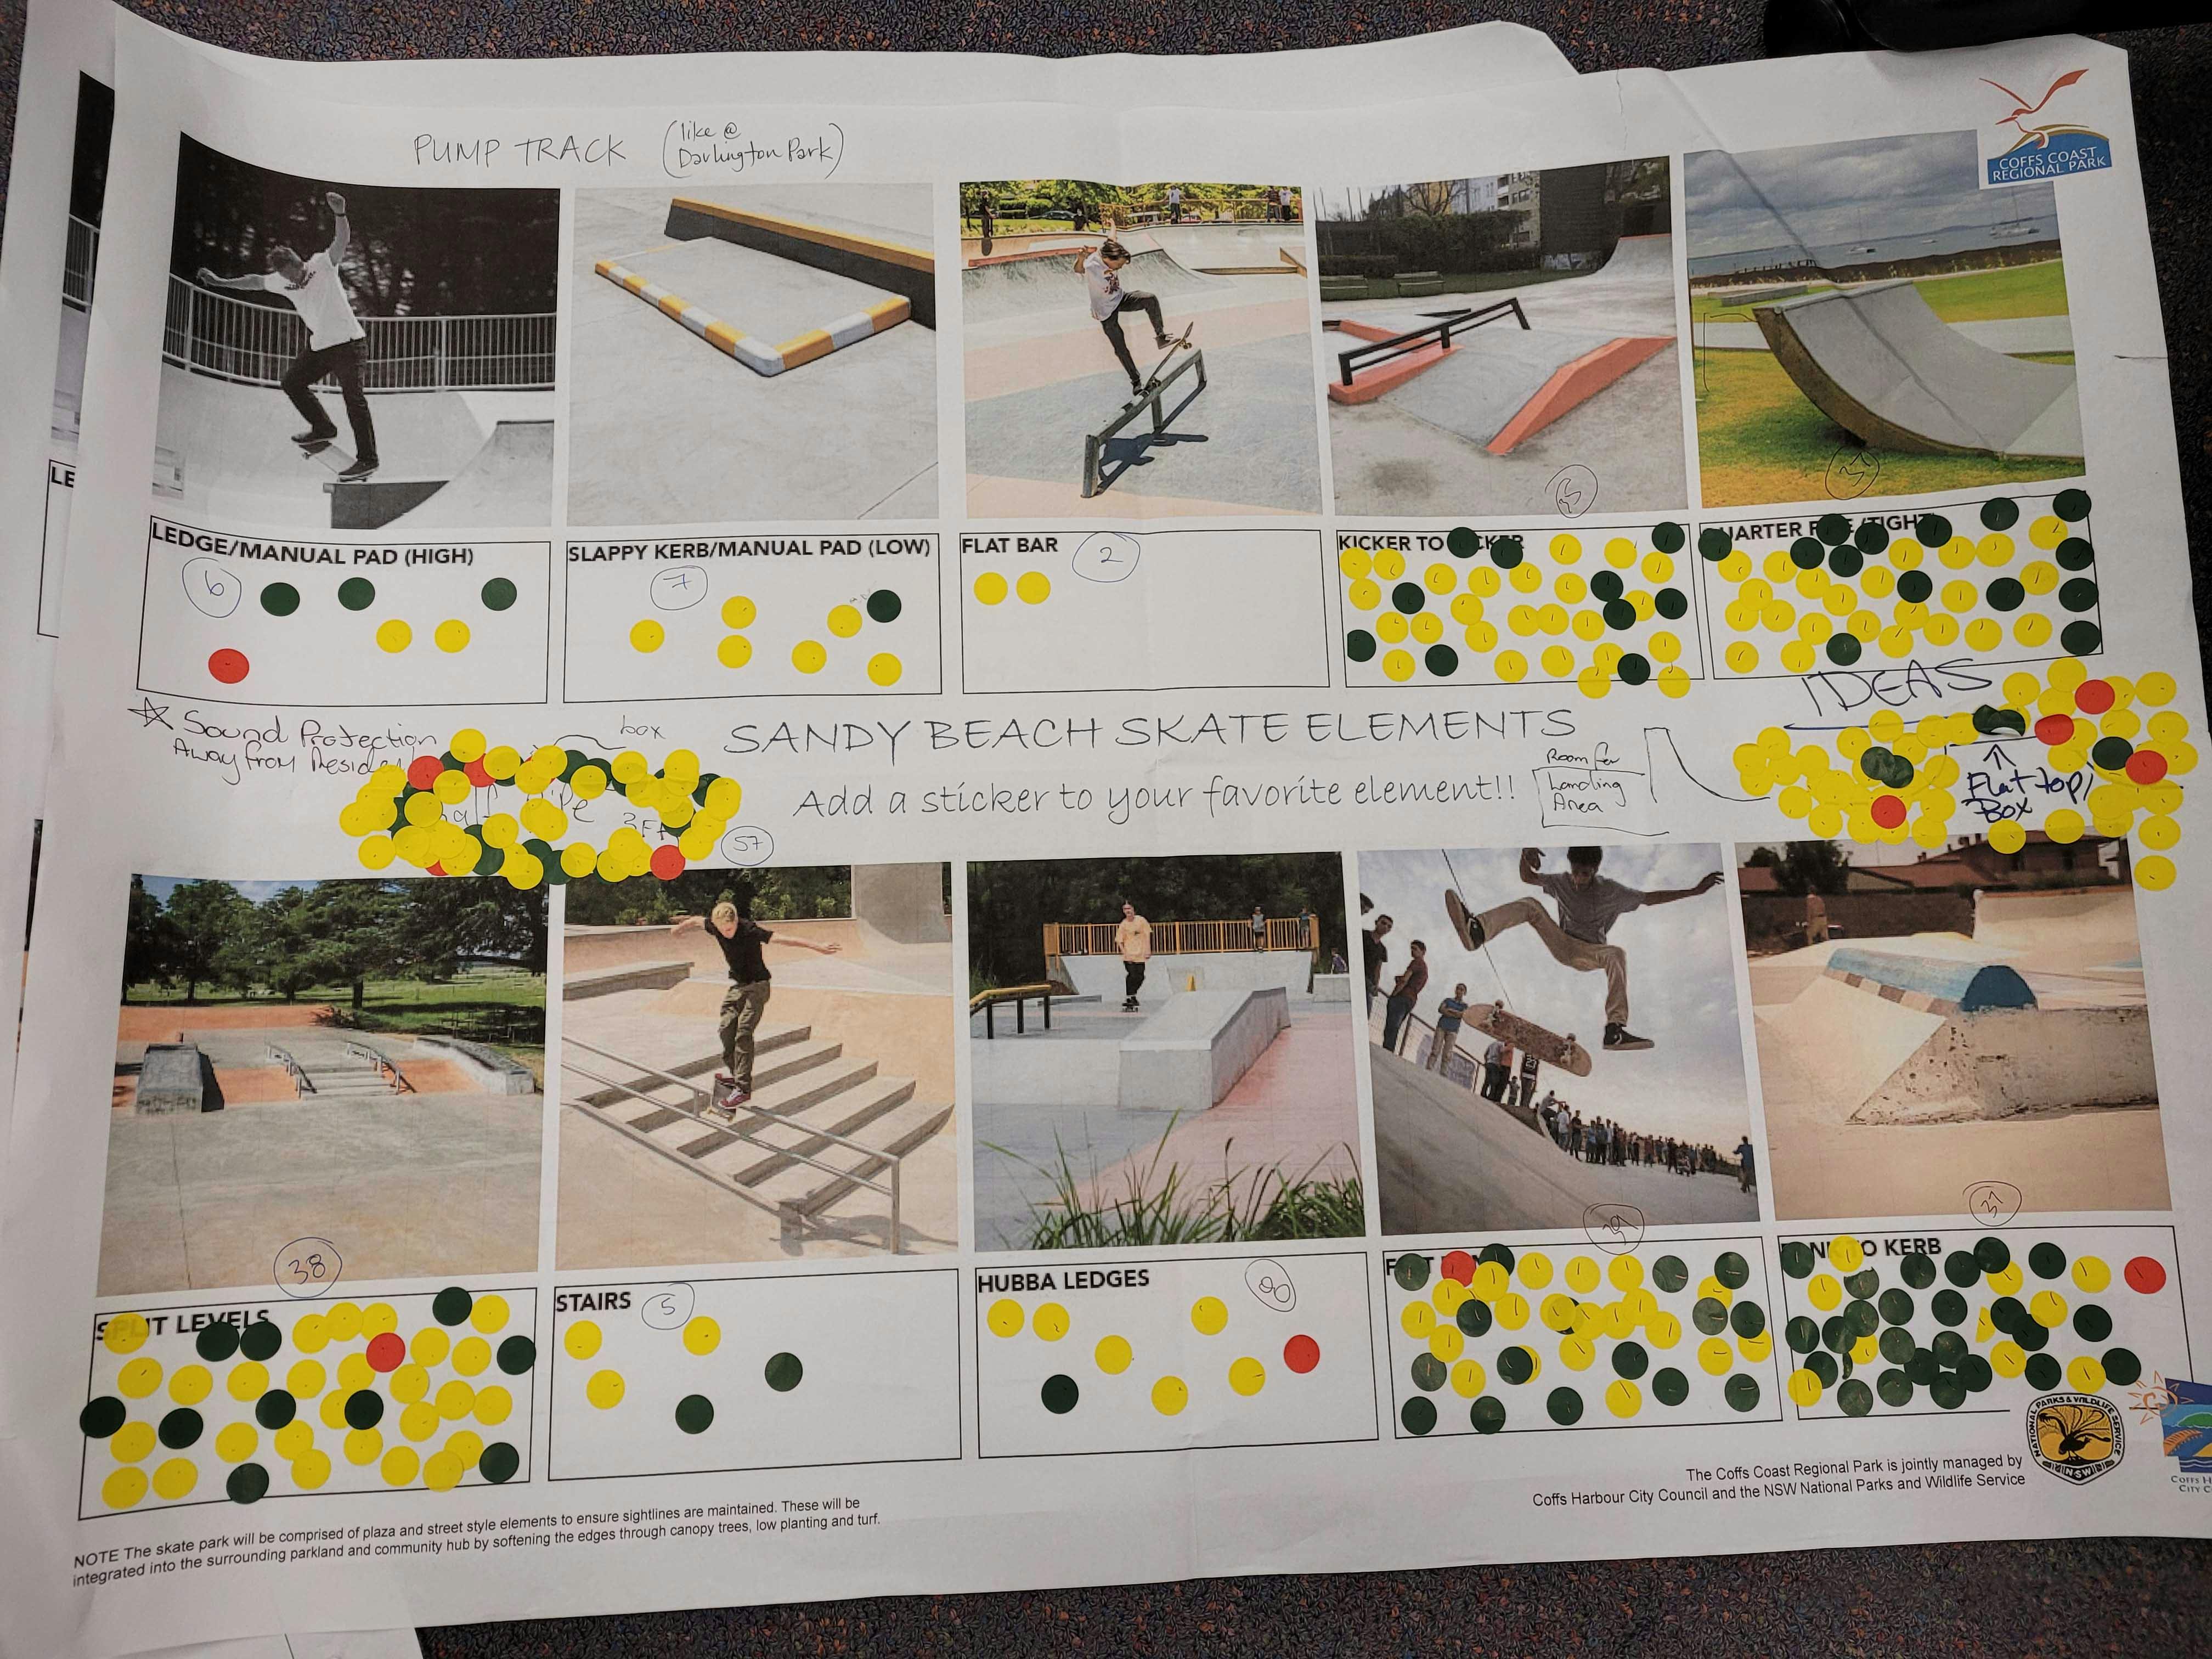 Skate element priorities proposed by community